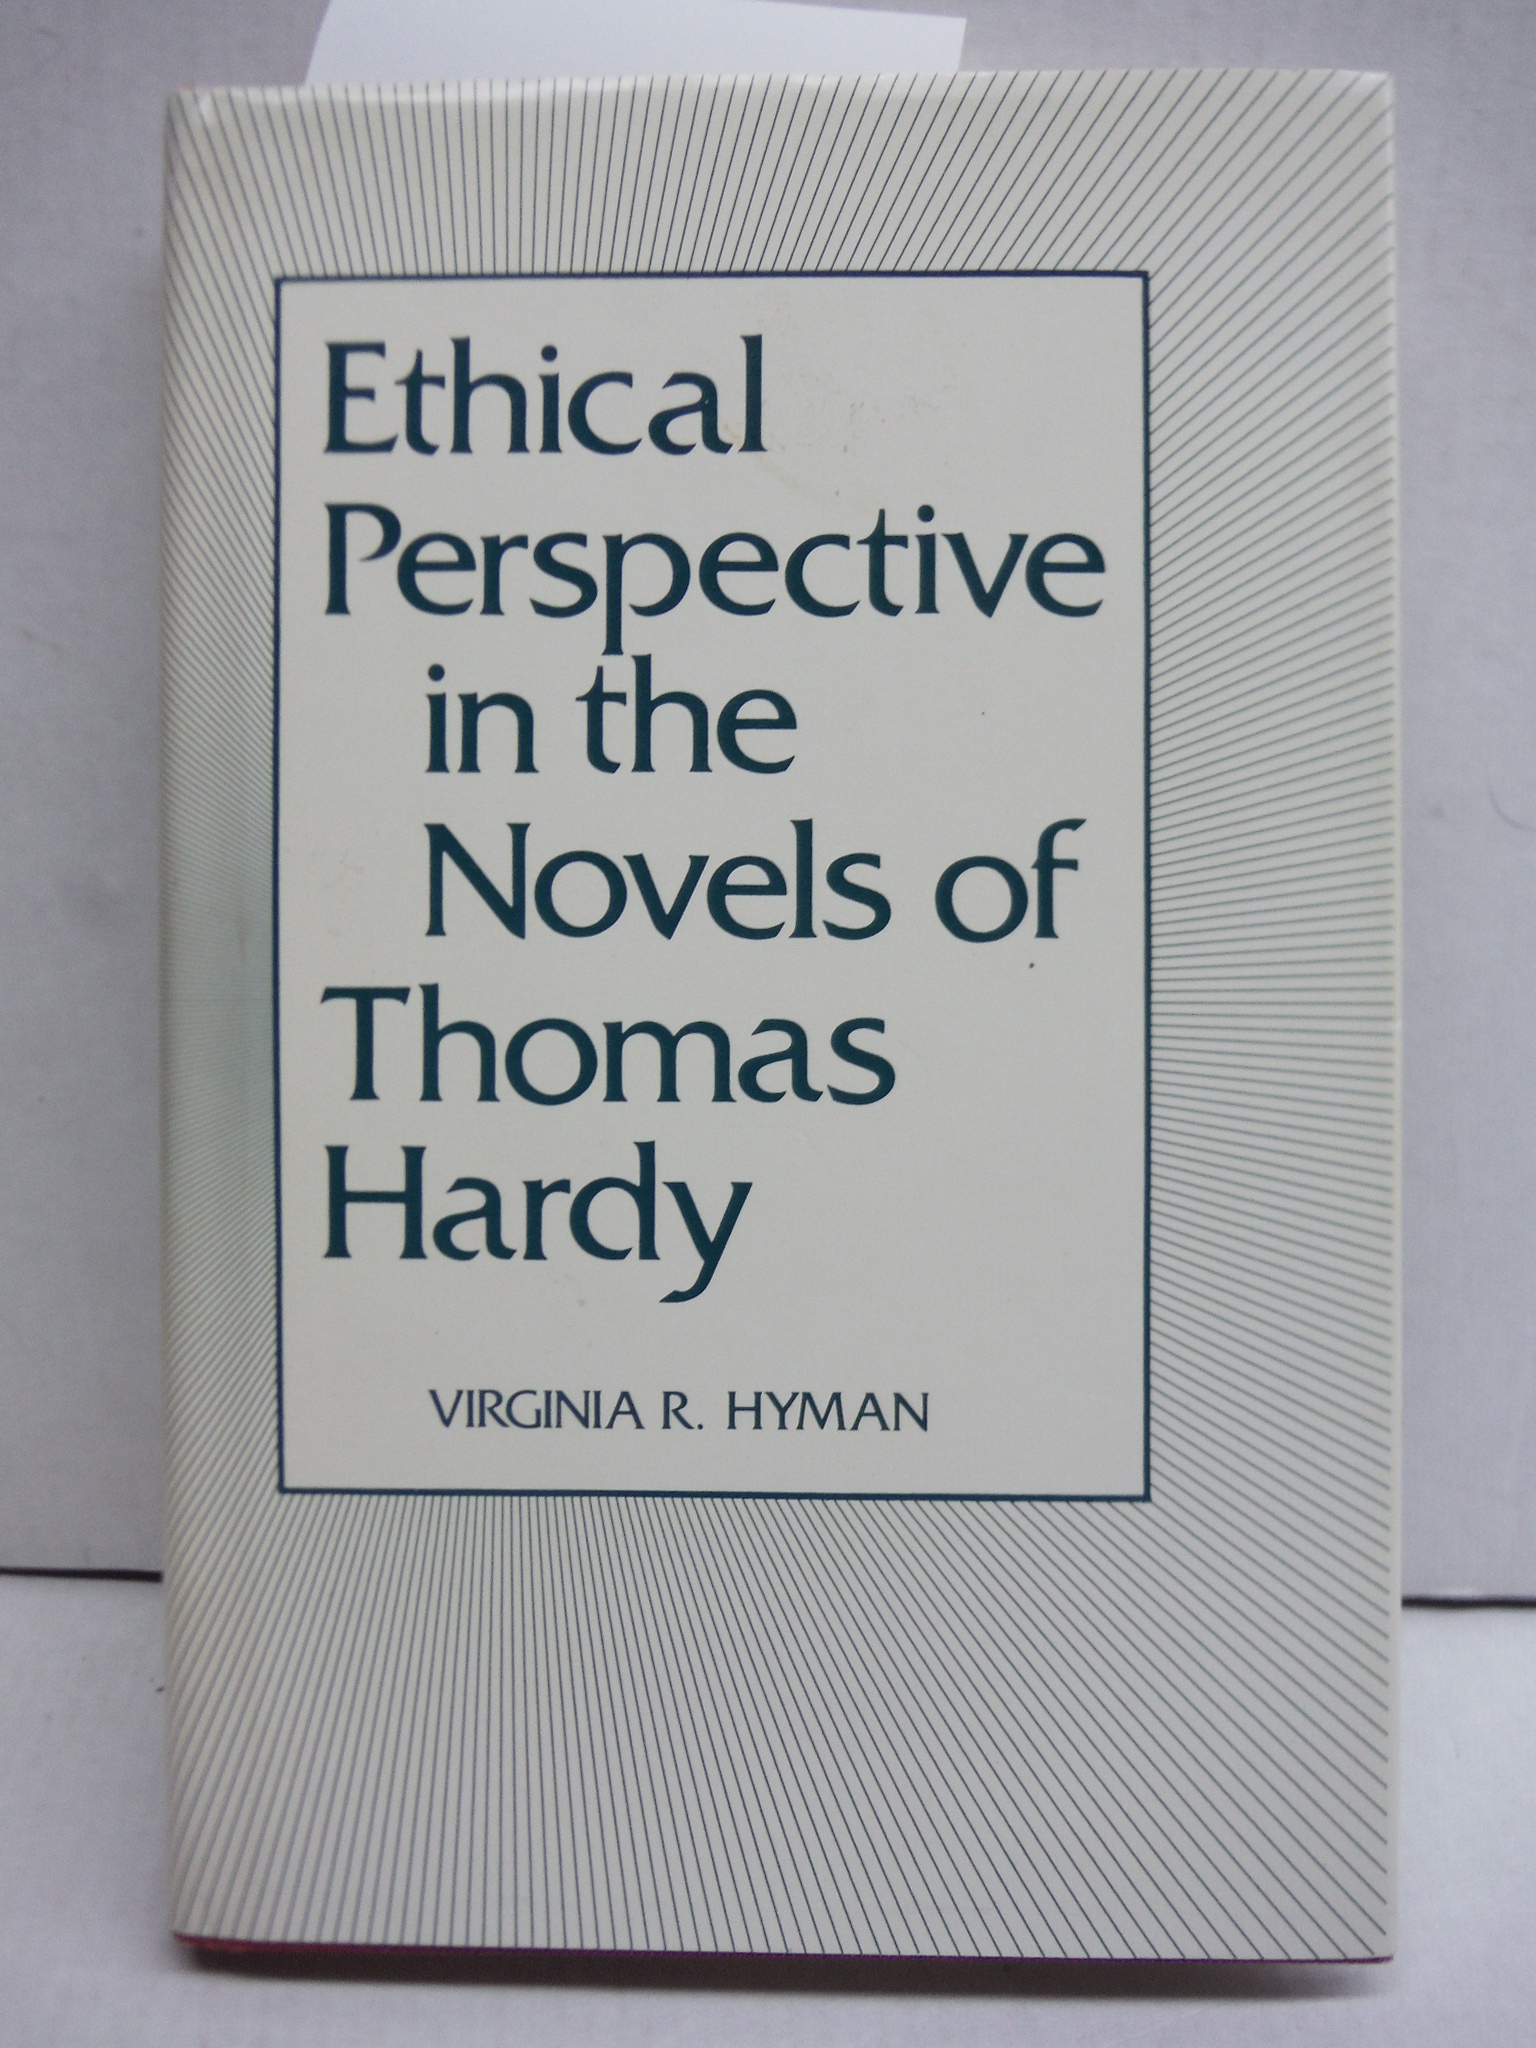 Ethical Perspective in the Novels of Thomas Hardy (Literary Criticism Series)